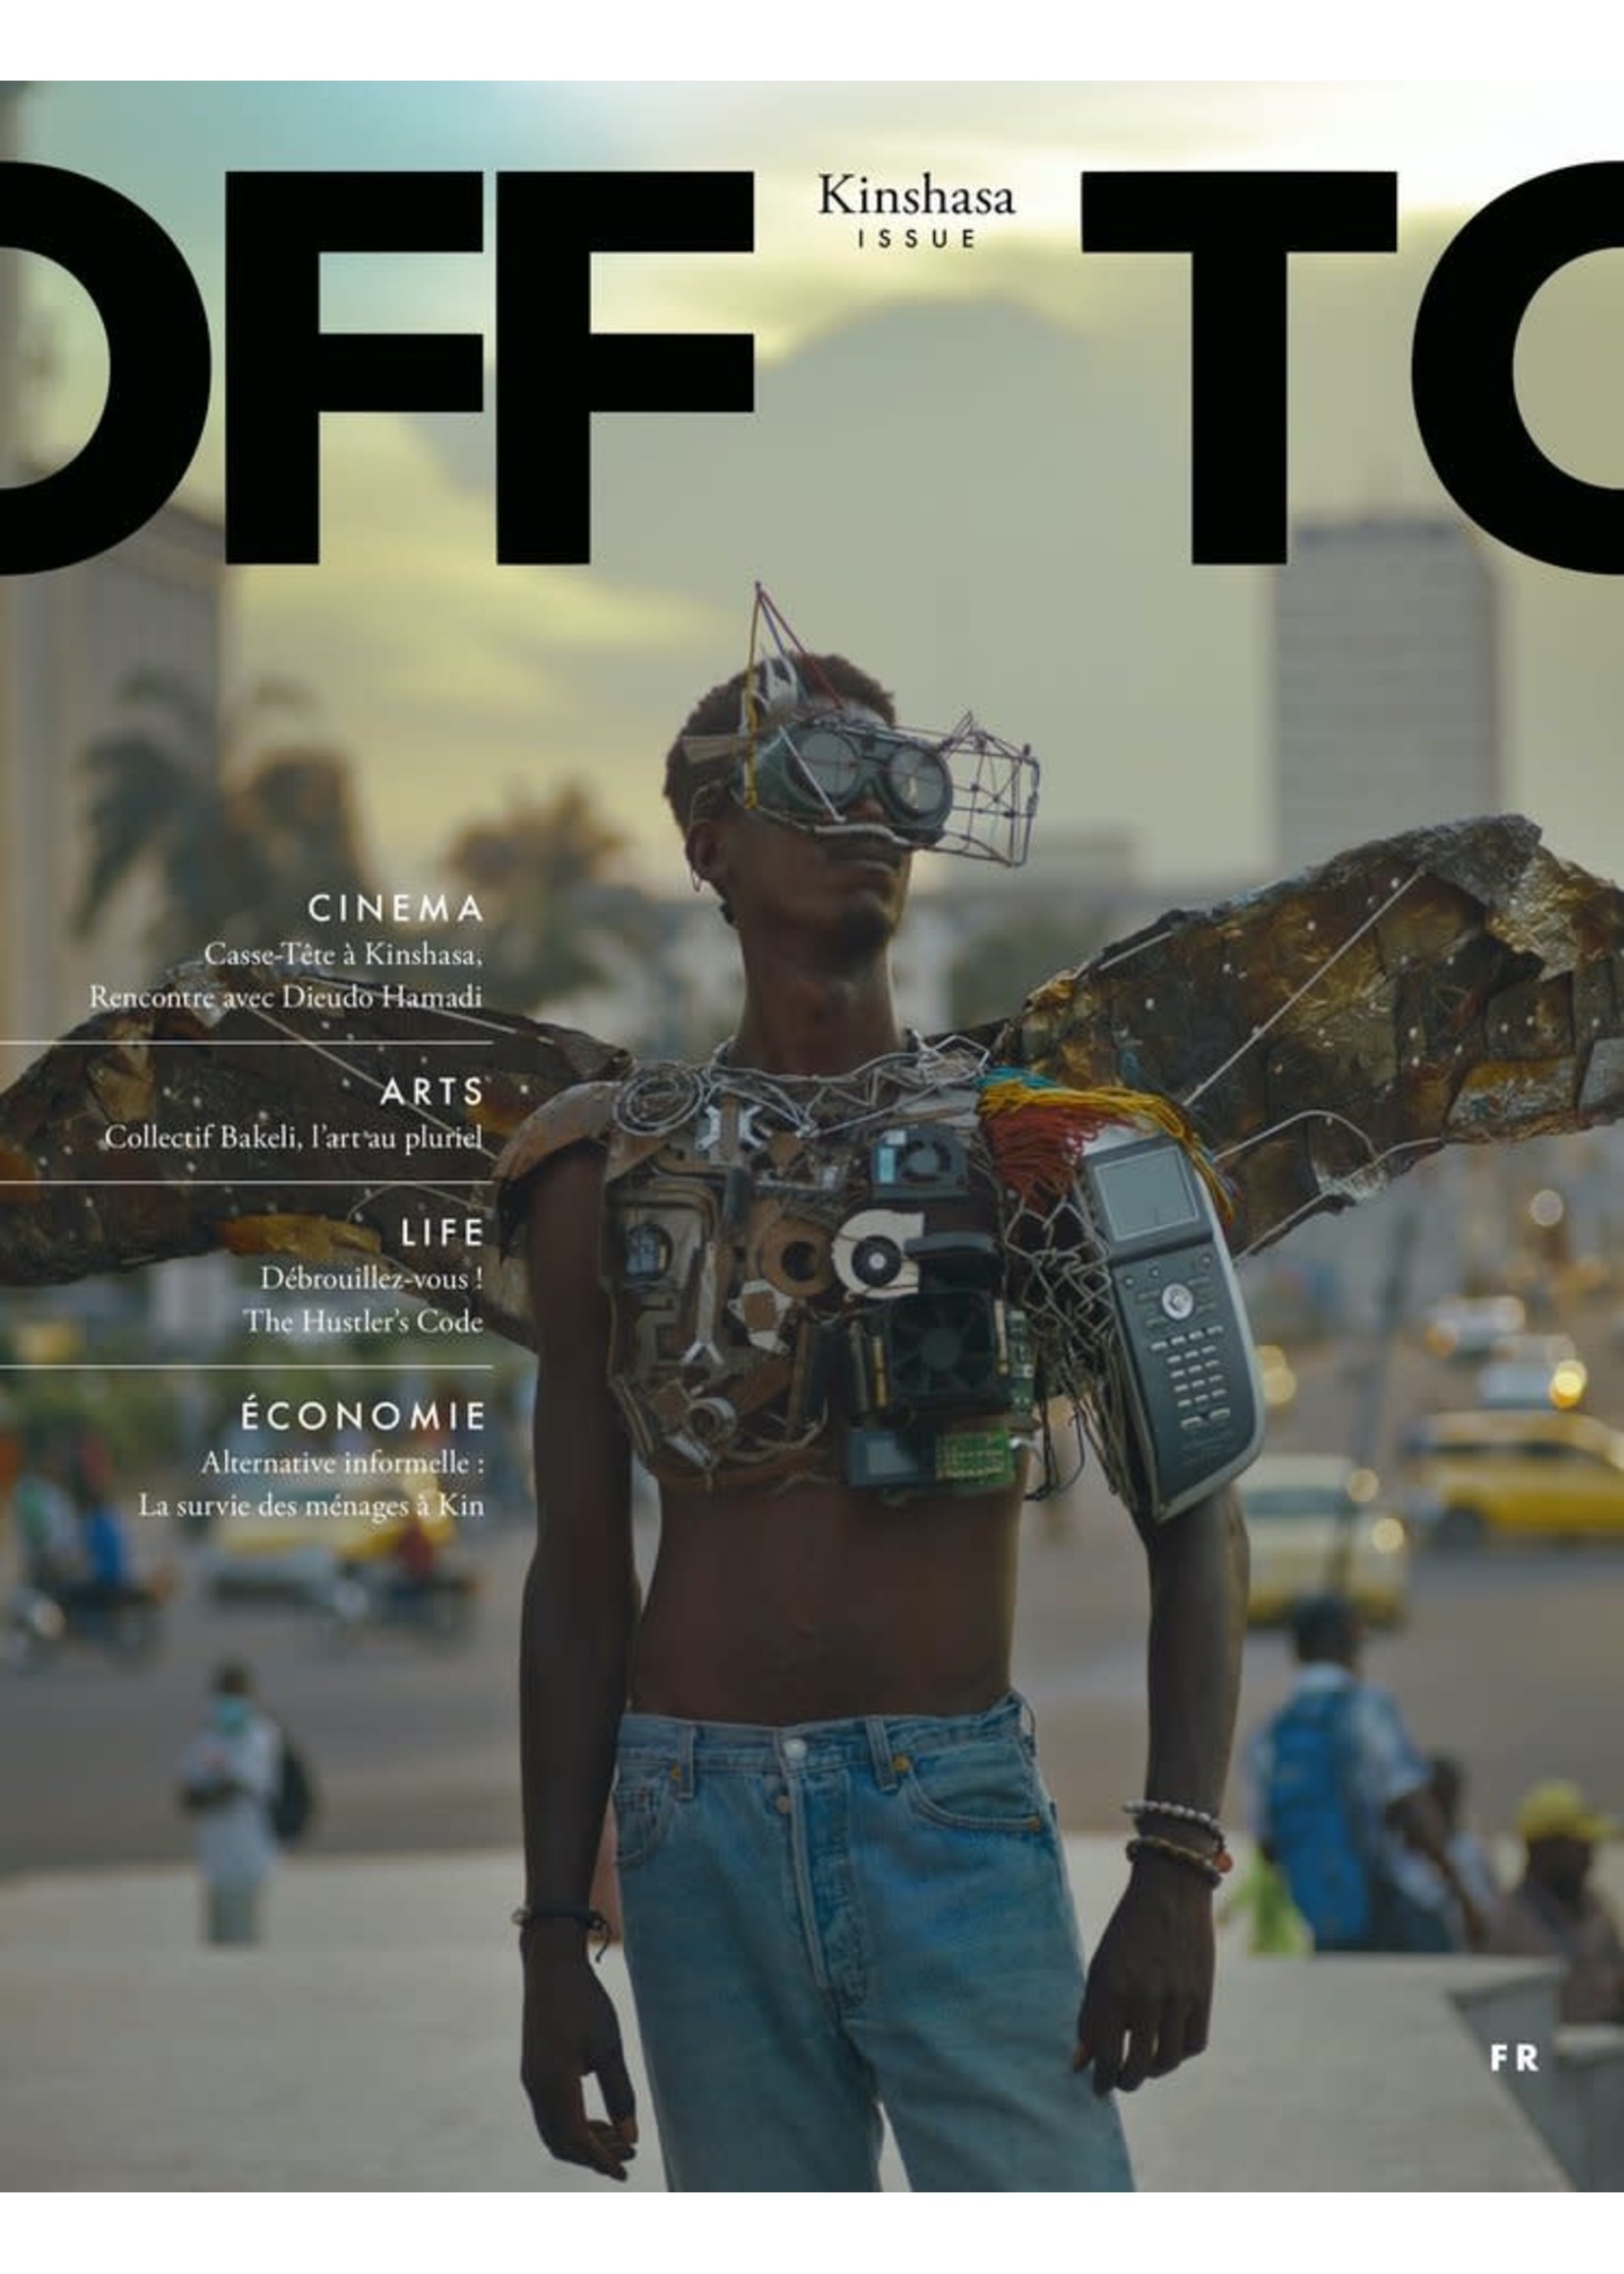 OFF TO OFF TO: The Kinshasa Issue